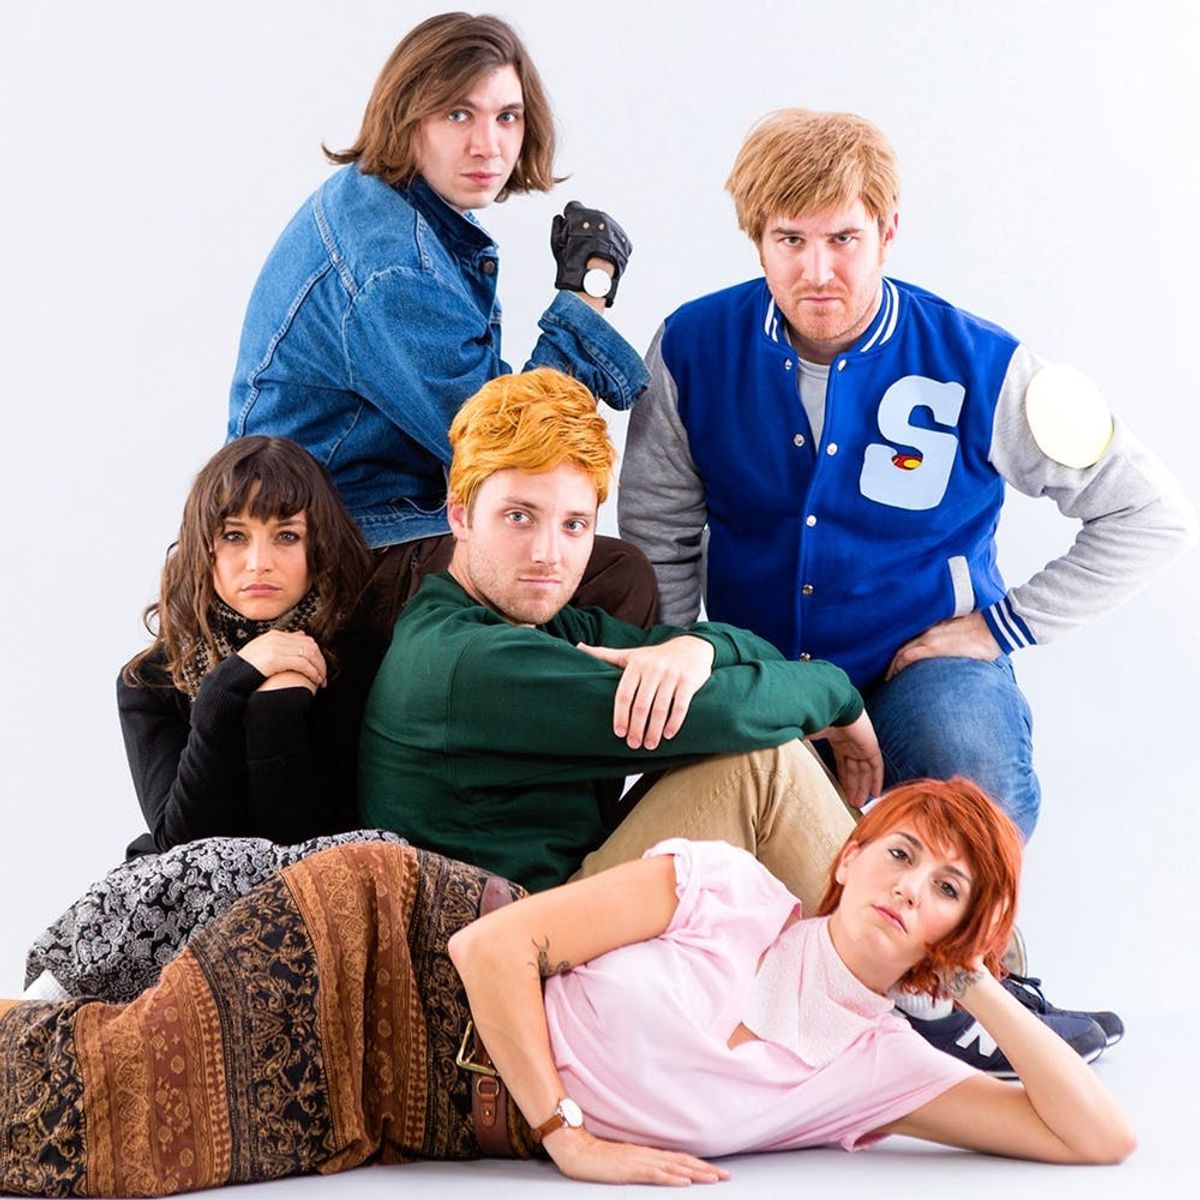 Head to Detention With This Breakfast Club Group Costume